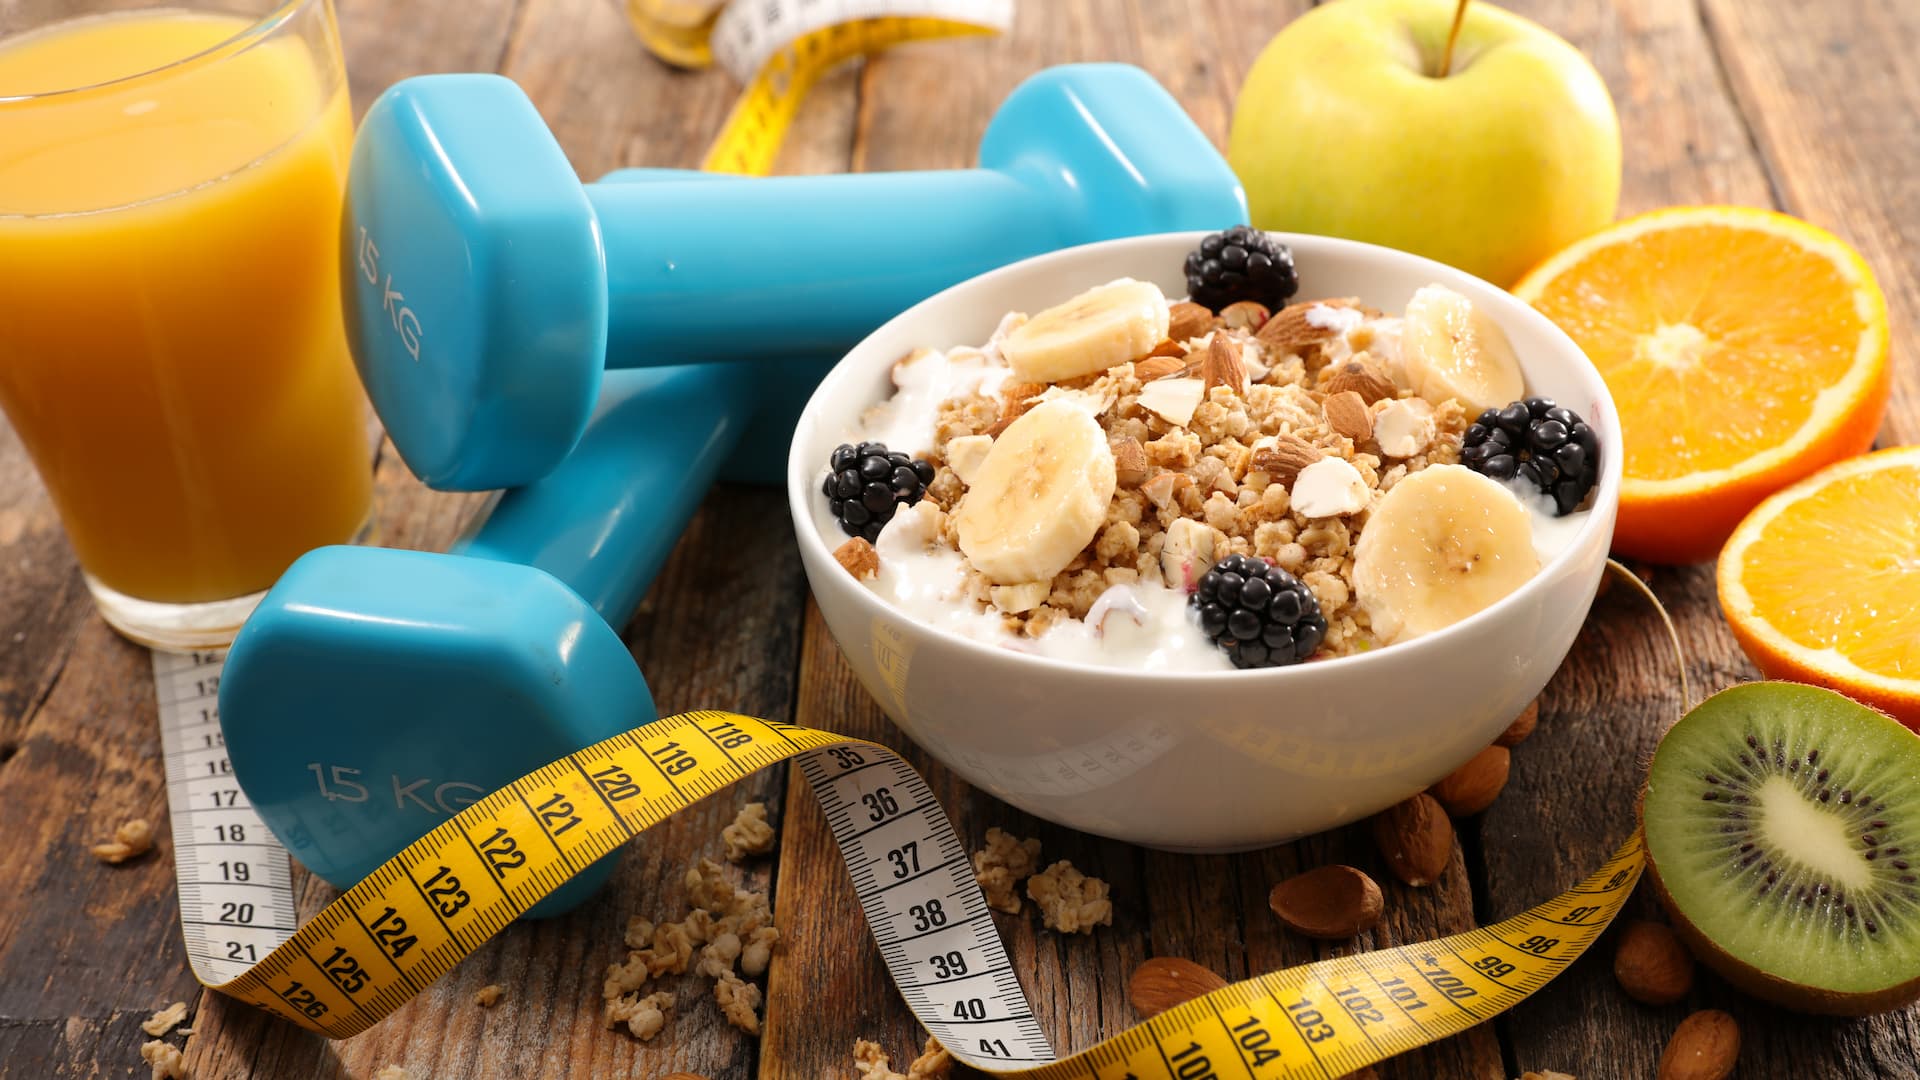 Lose Weight the Healthy Way with 25 Tips from Registered Dietitians